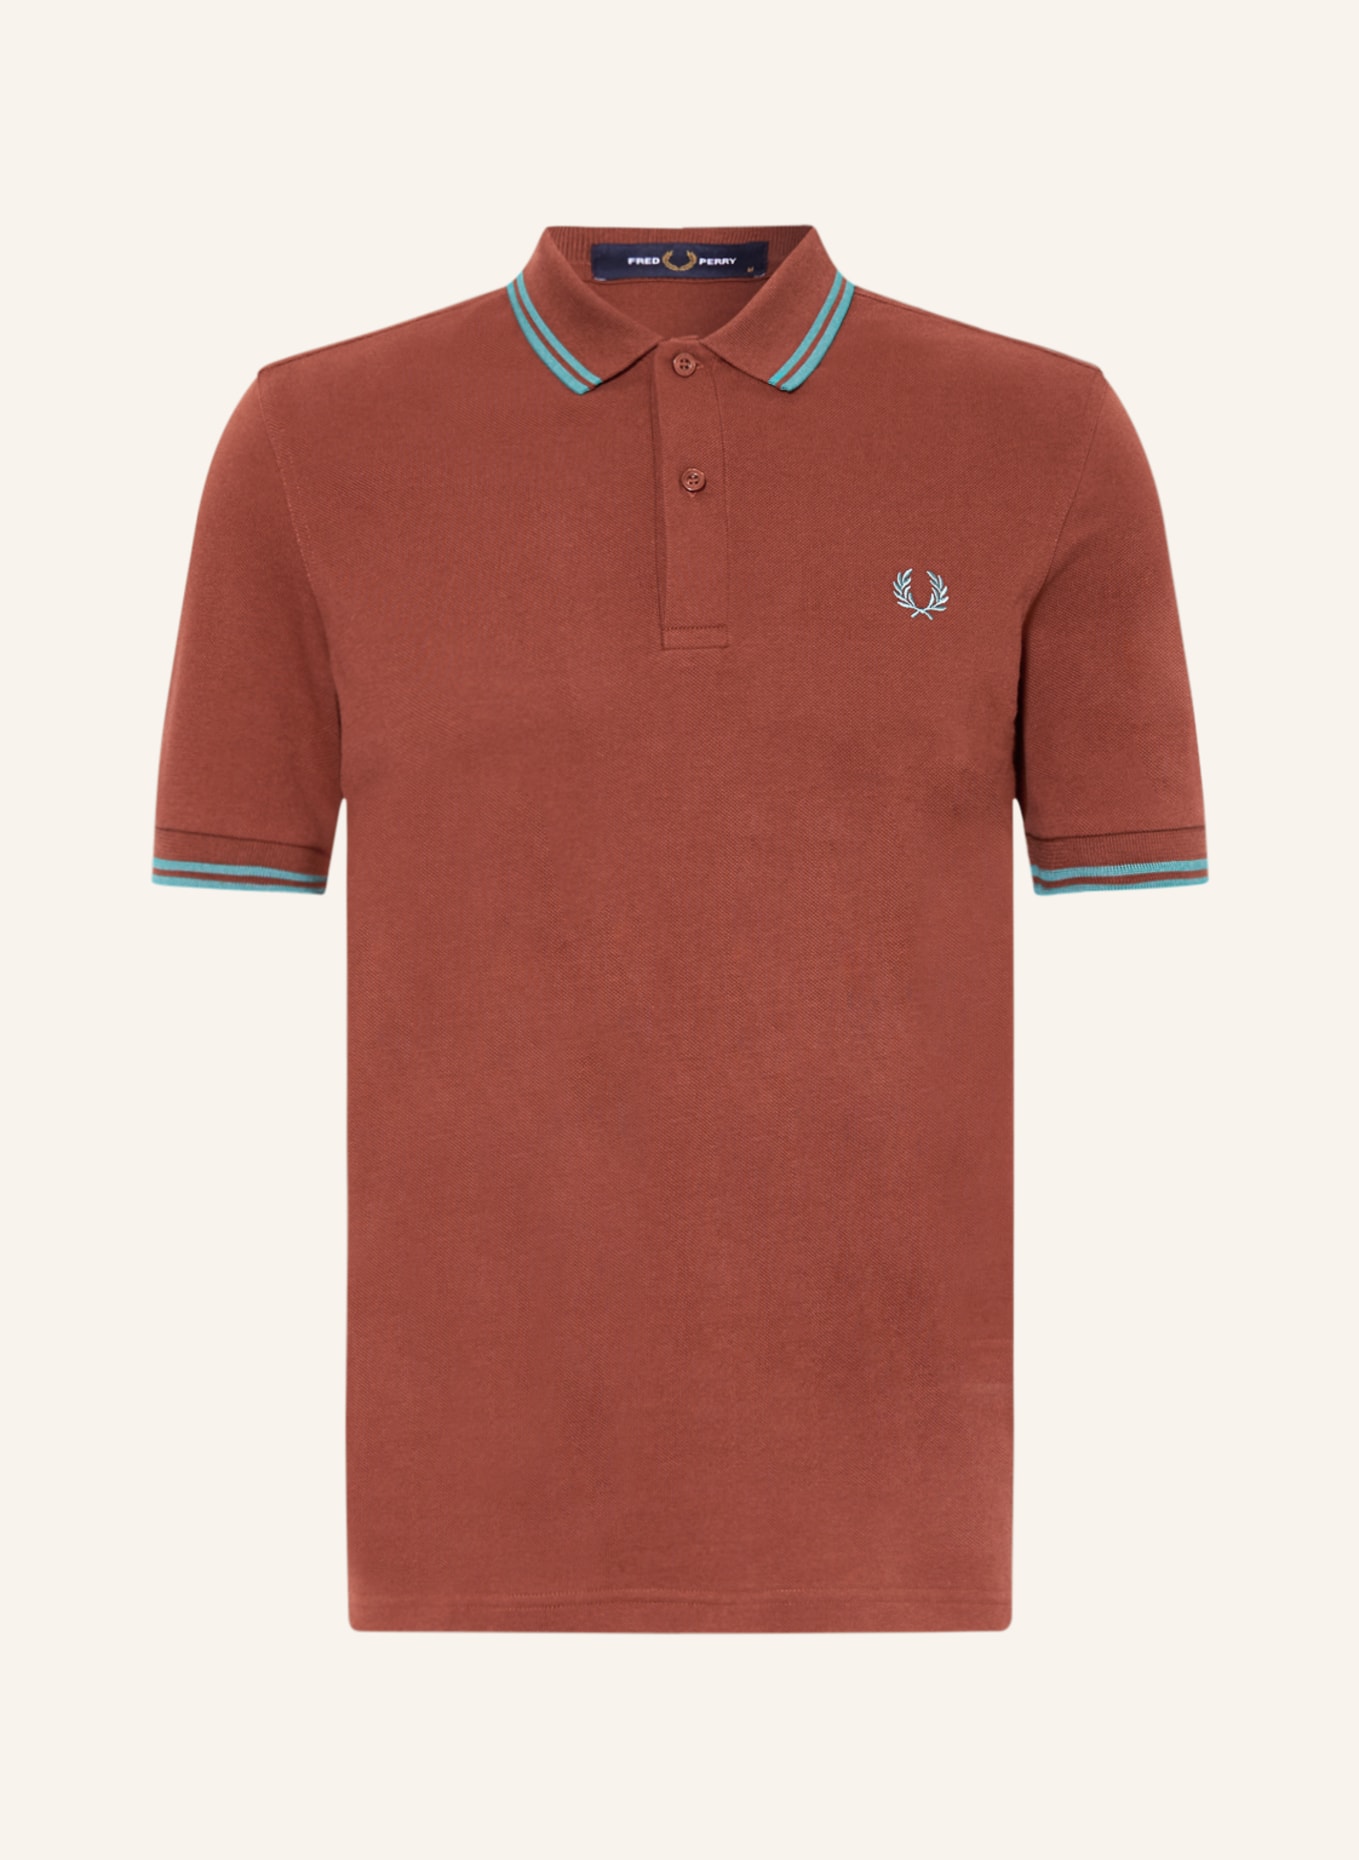 Рубашка поло FRED PERRY Piqué M3600 Slim Fit ботинки hawley suede fred perry имбирь